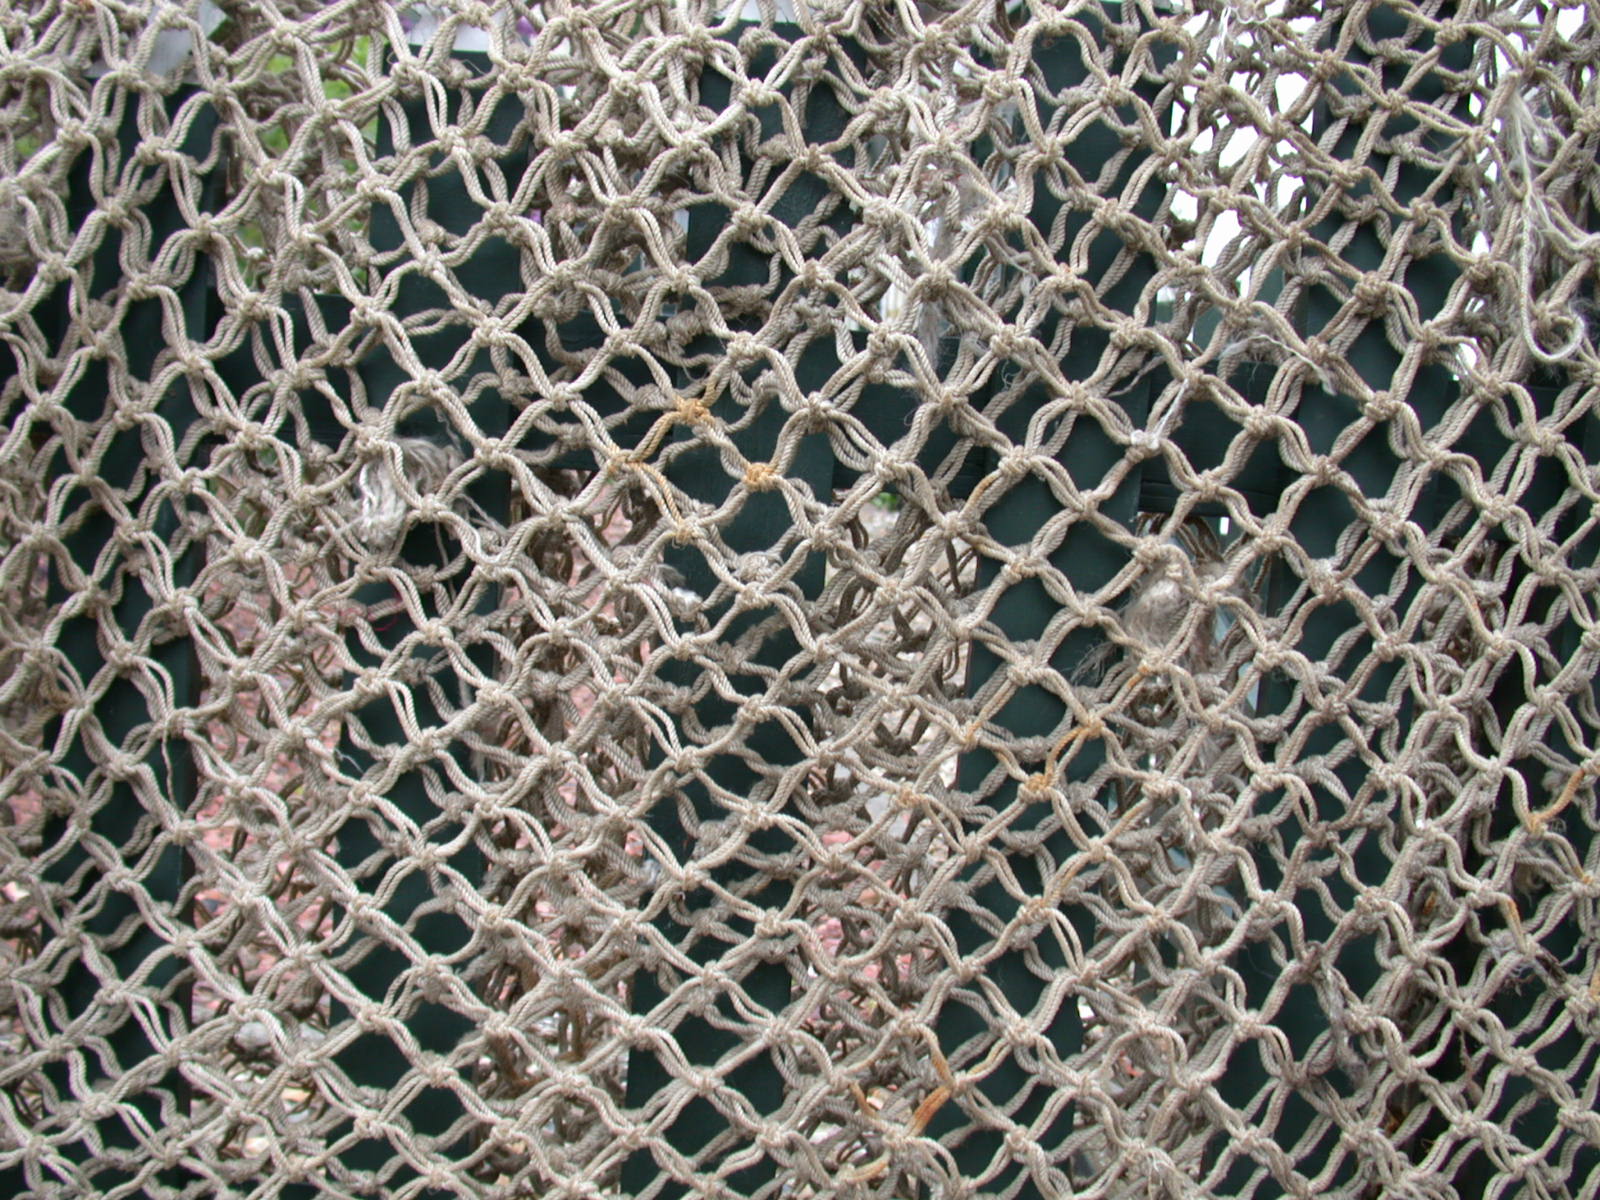 Image*After : photos : fishing net nets rope knots mesh